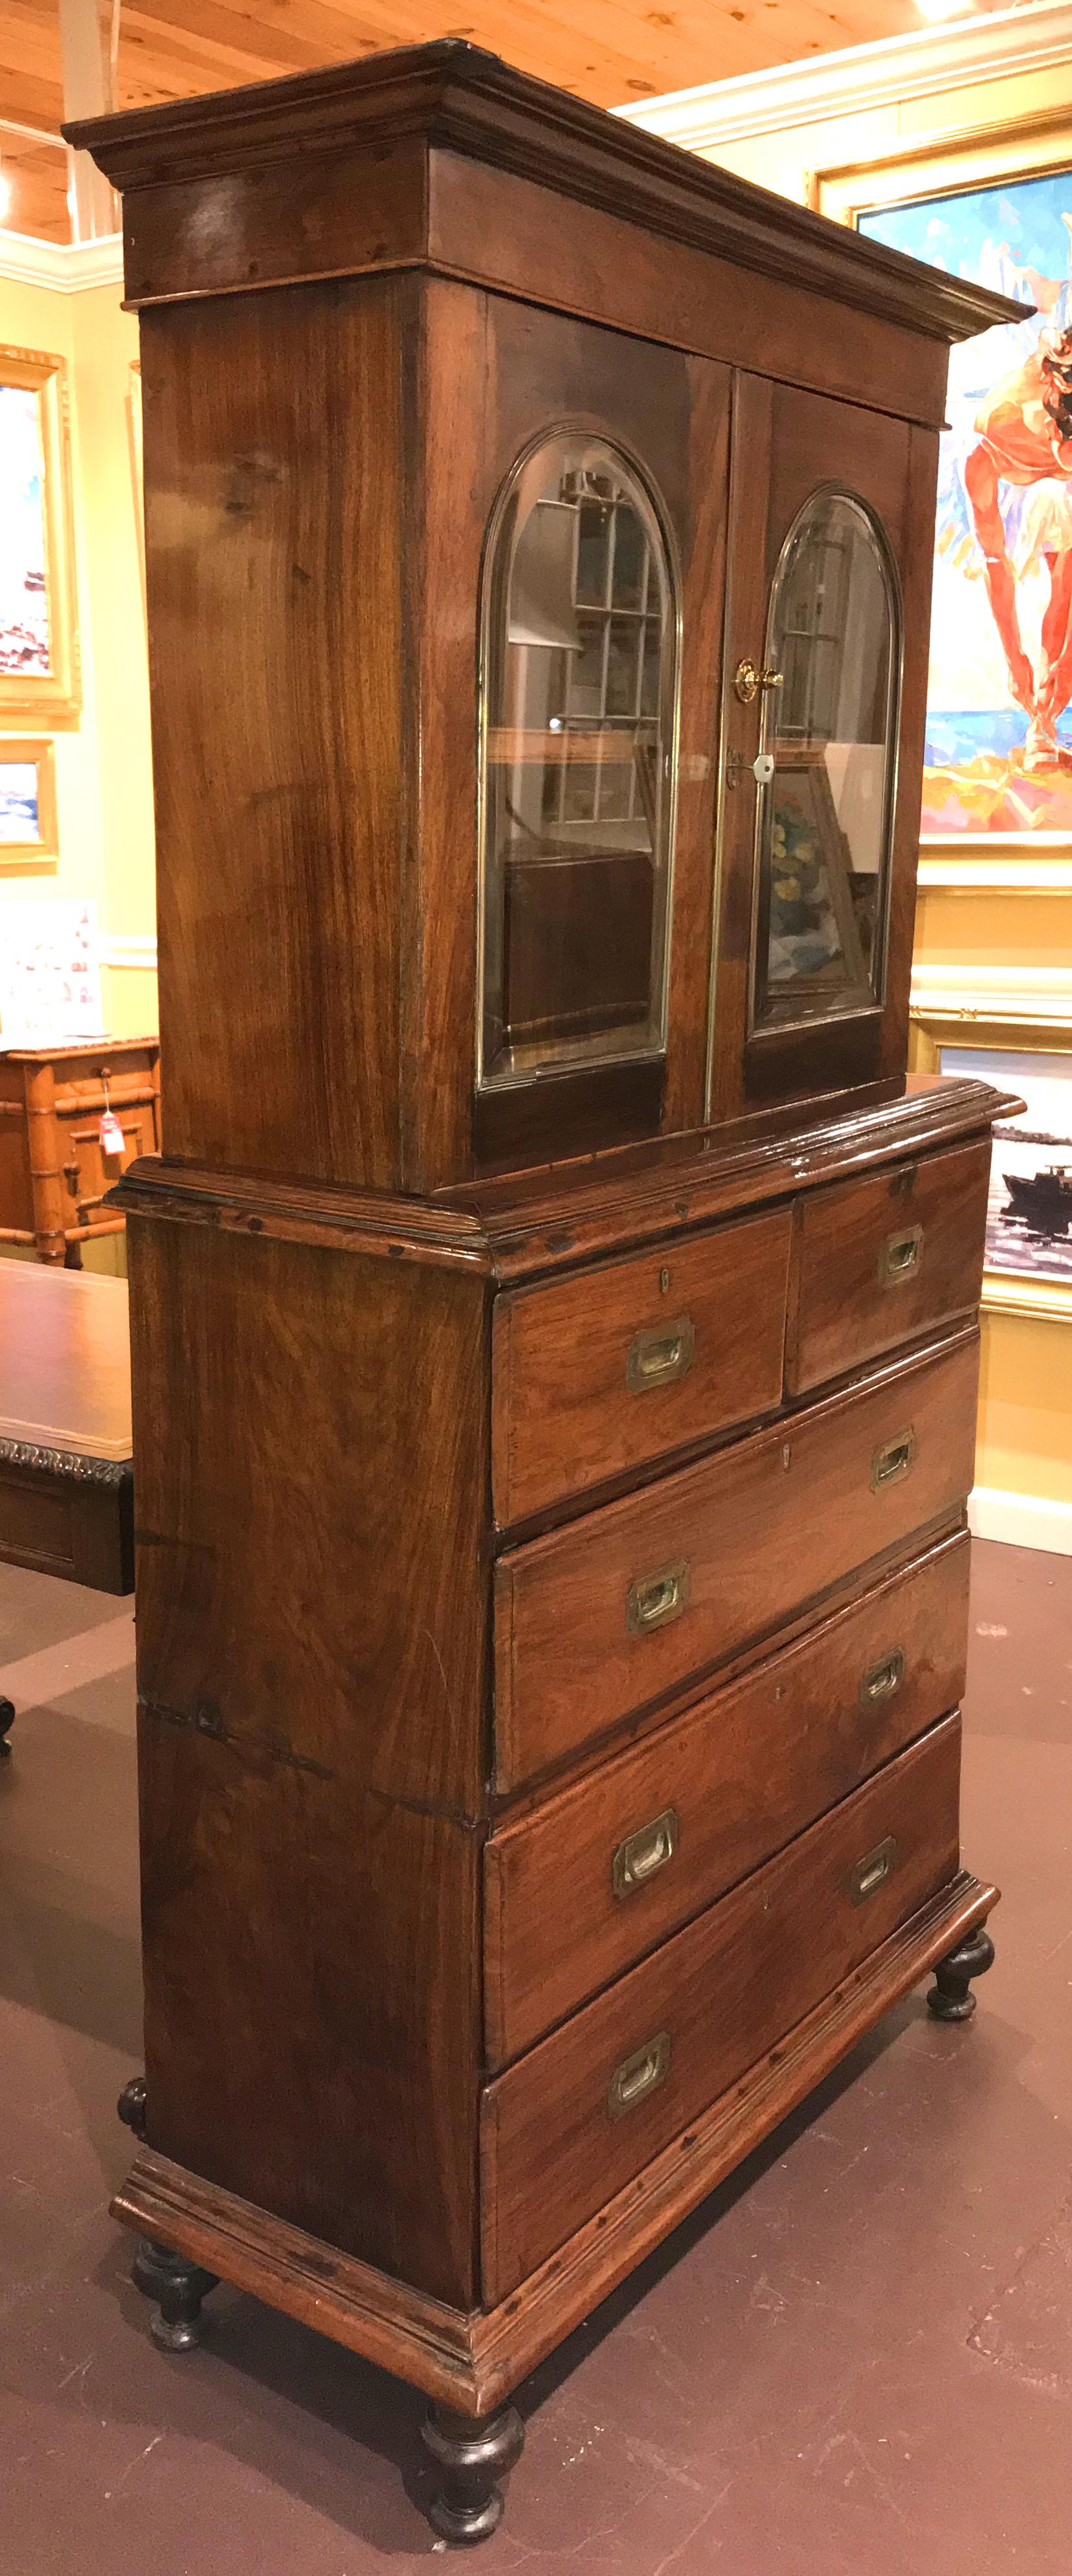 A unique form three-piece Anglo-Indian rosewood Campaign chest, possibly a sea captain’s chest or cabinet, featuring a bookcase top with molded cornice, surmounting two doors, each with brass trimmed arched beveled glass, which open to a single